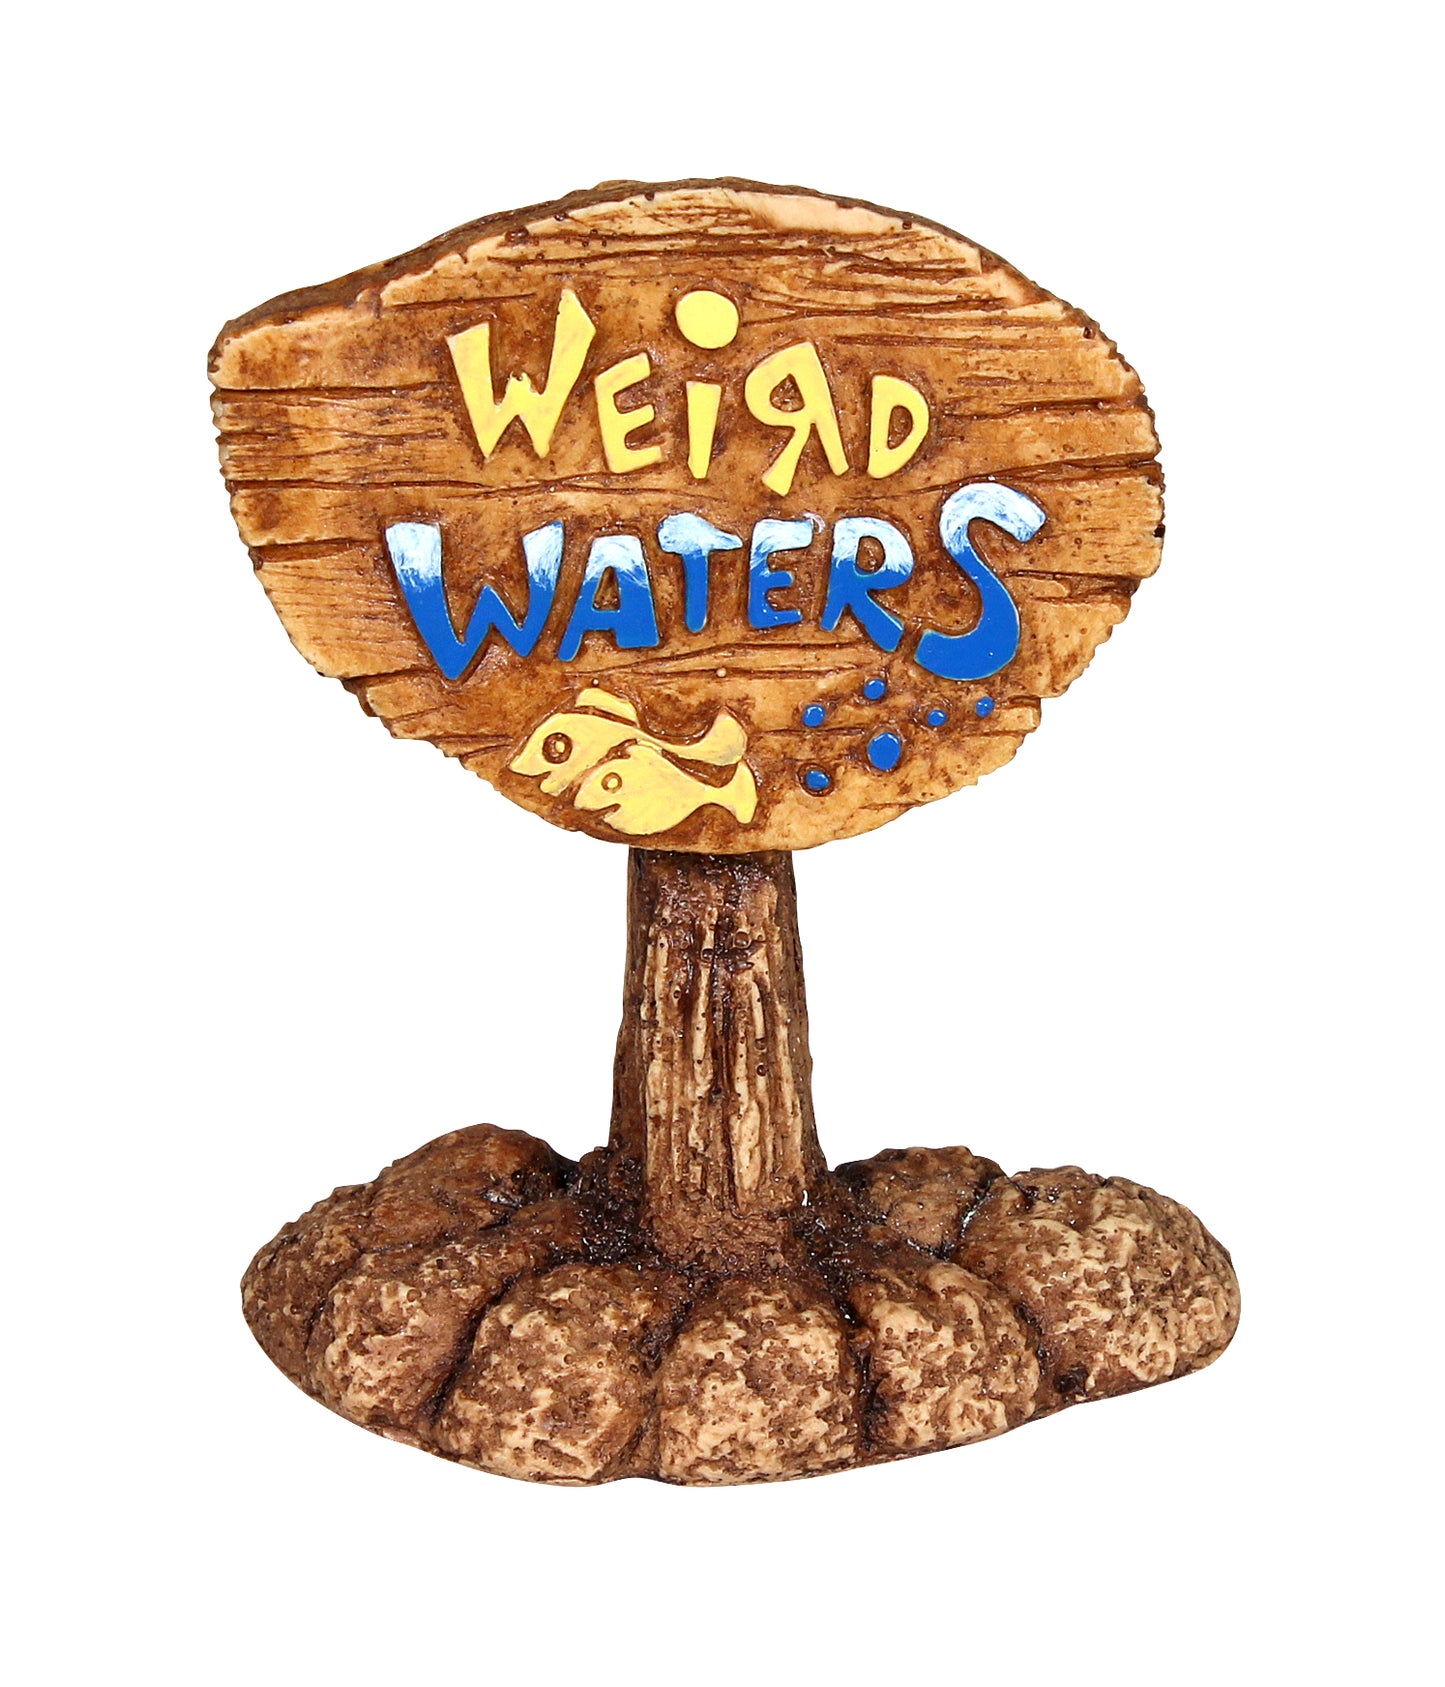 WW Weird Water Sign Resin Ornament - Map Price $4.99